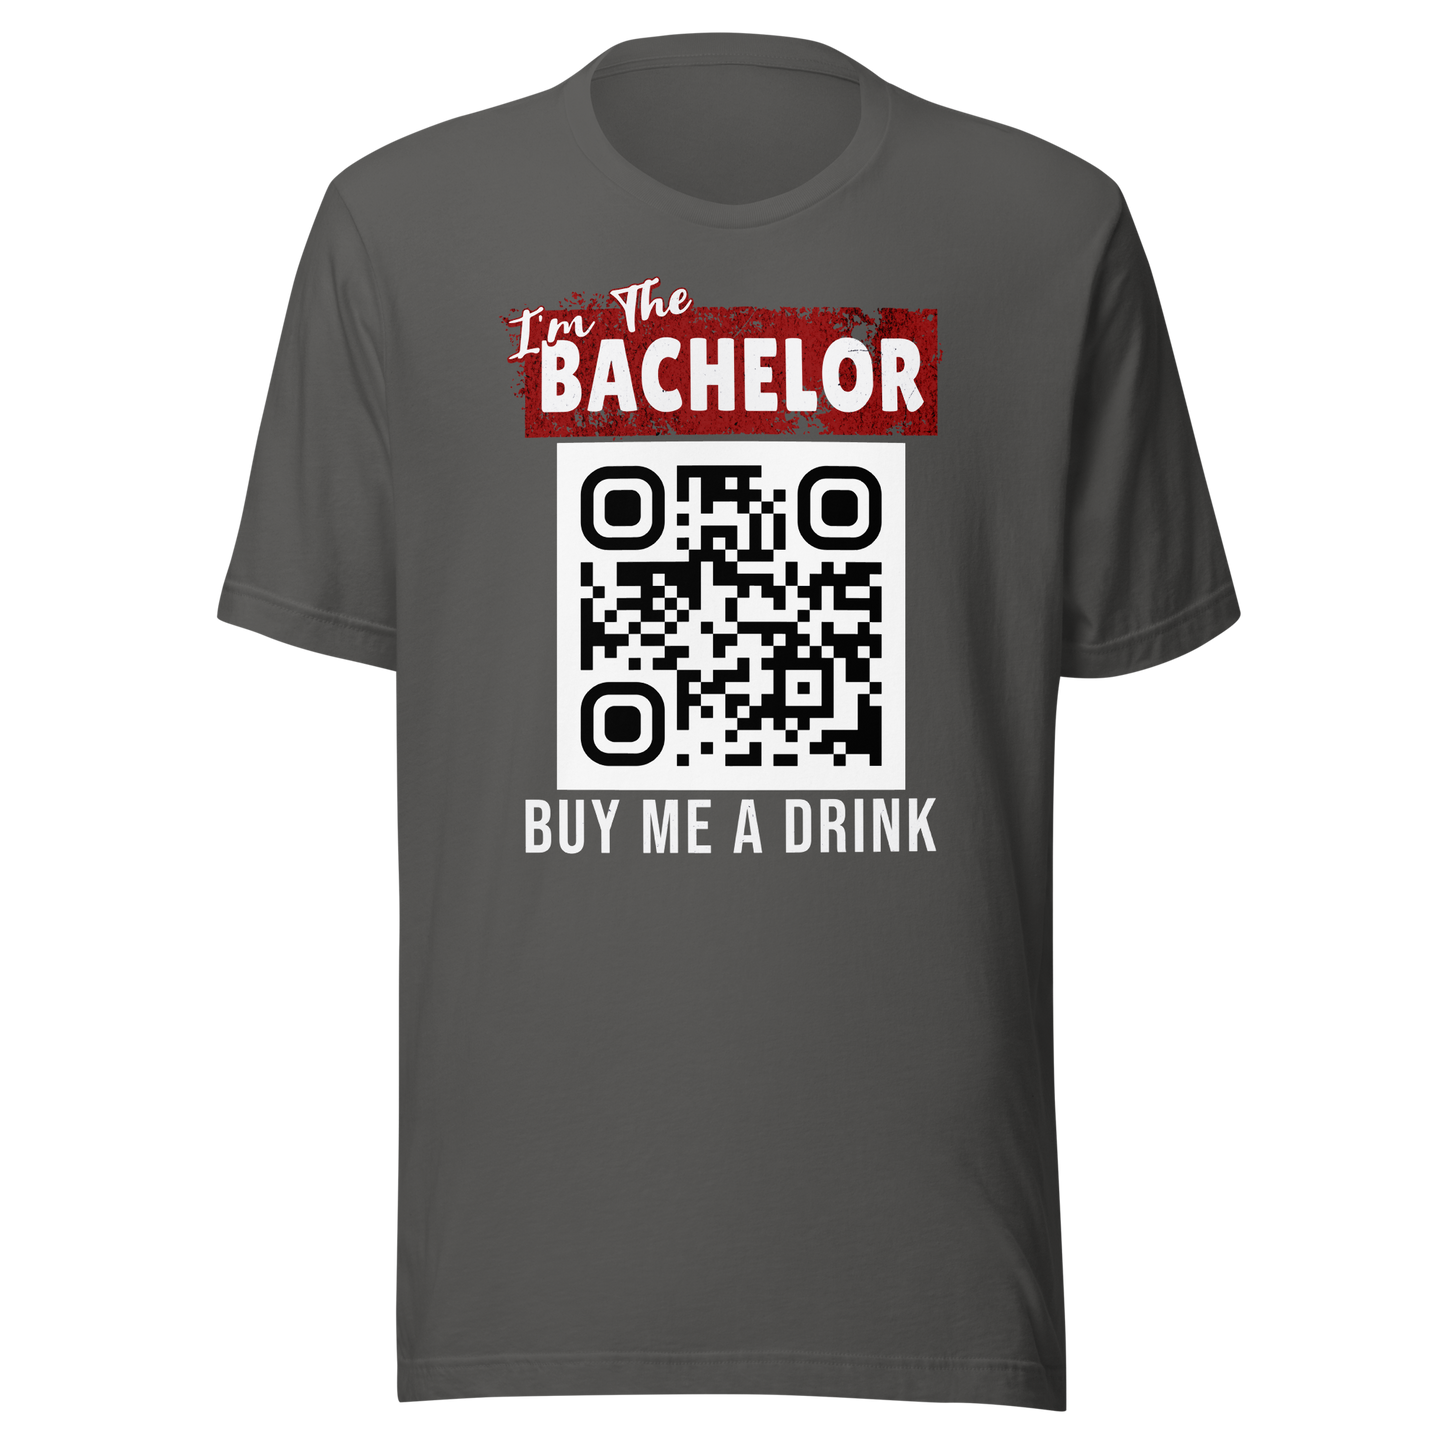 I'm The Bachelor Buy Me A Drink T-shirt - Personalizable